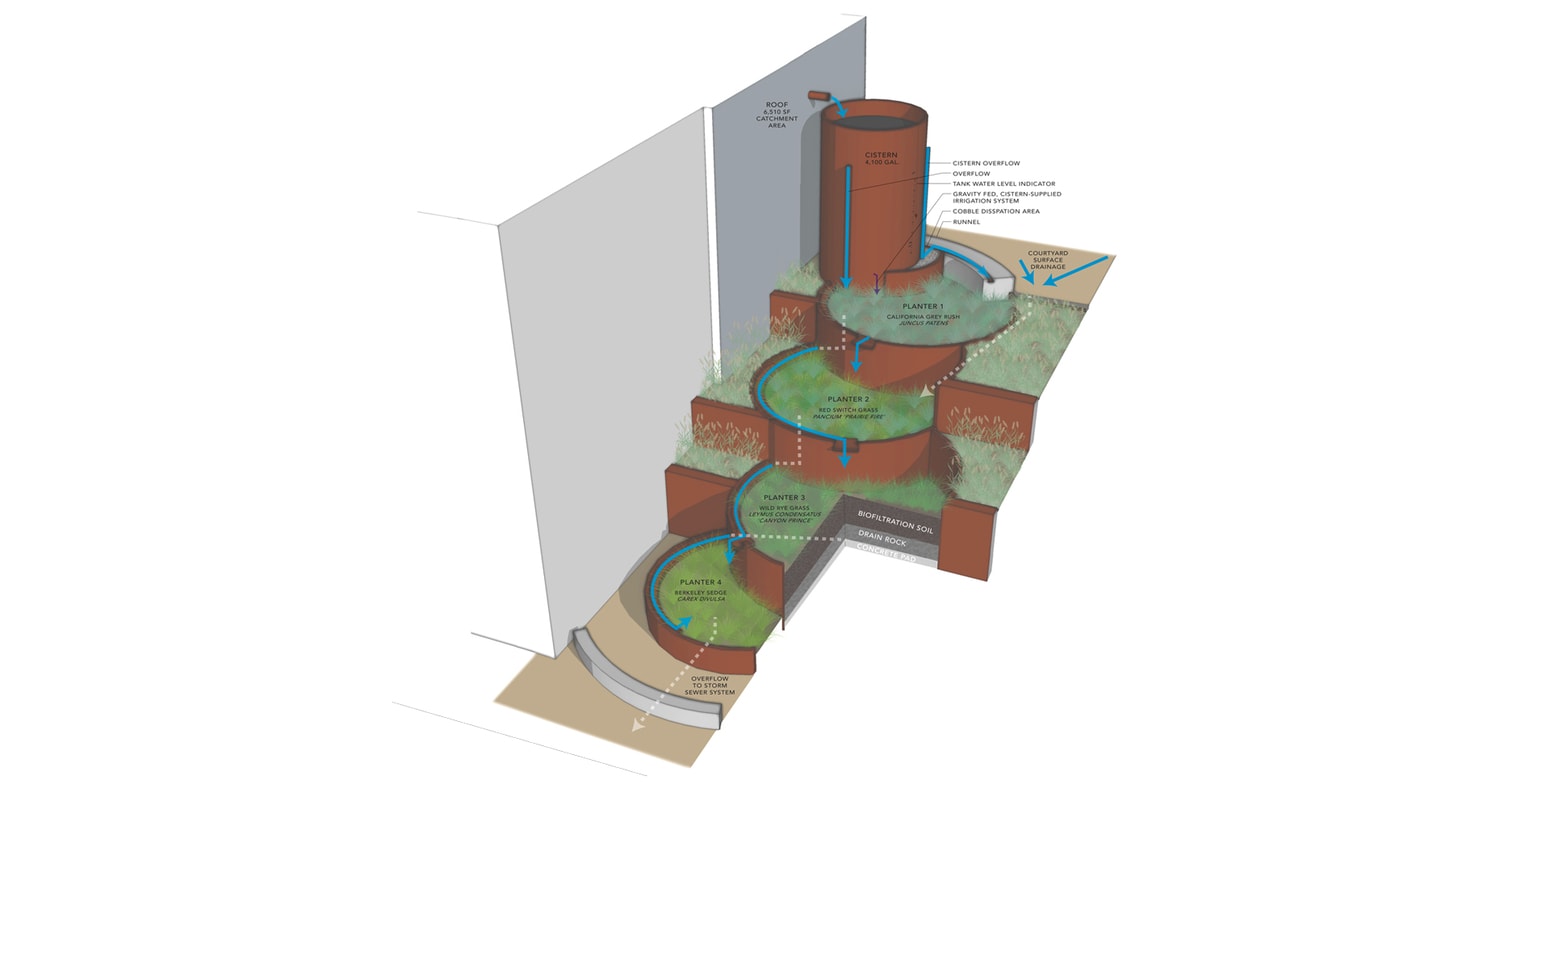 Graphic how cistern works